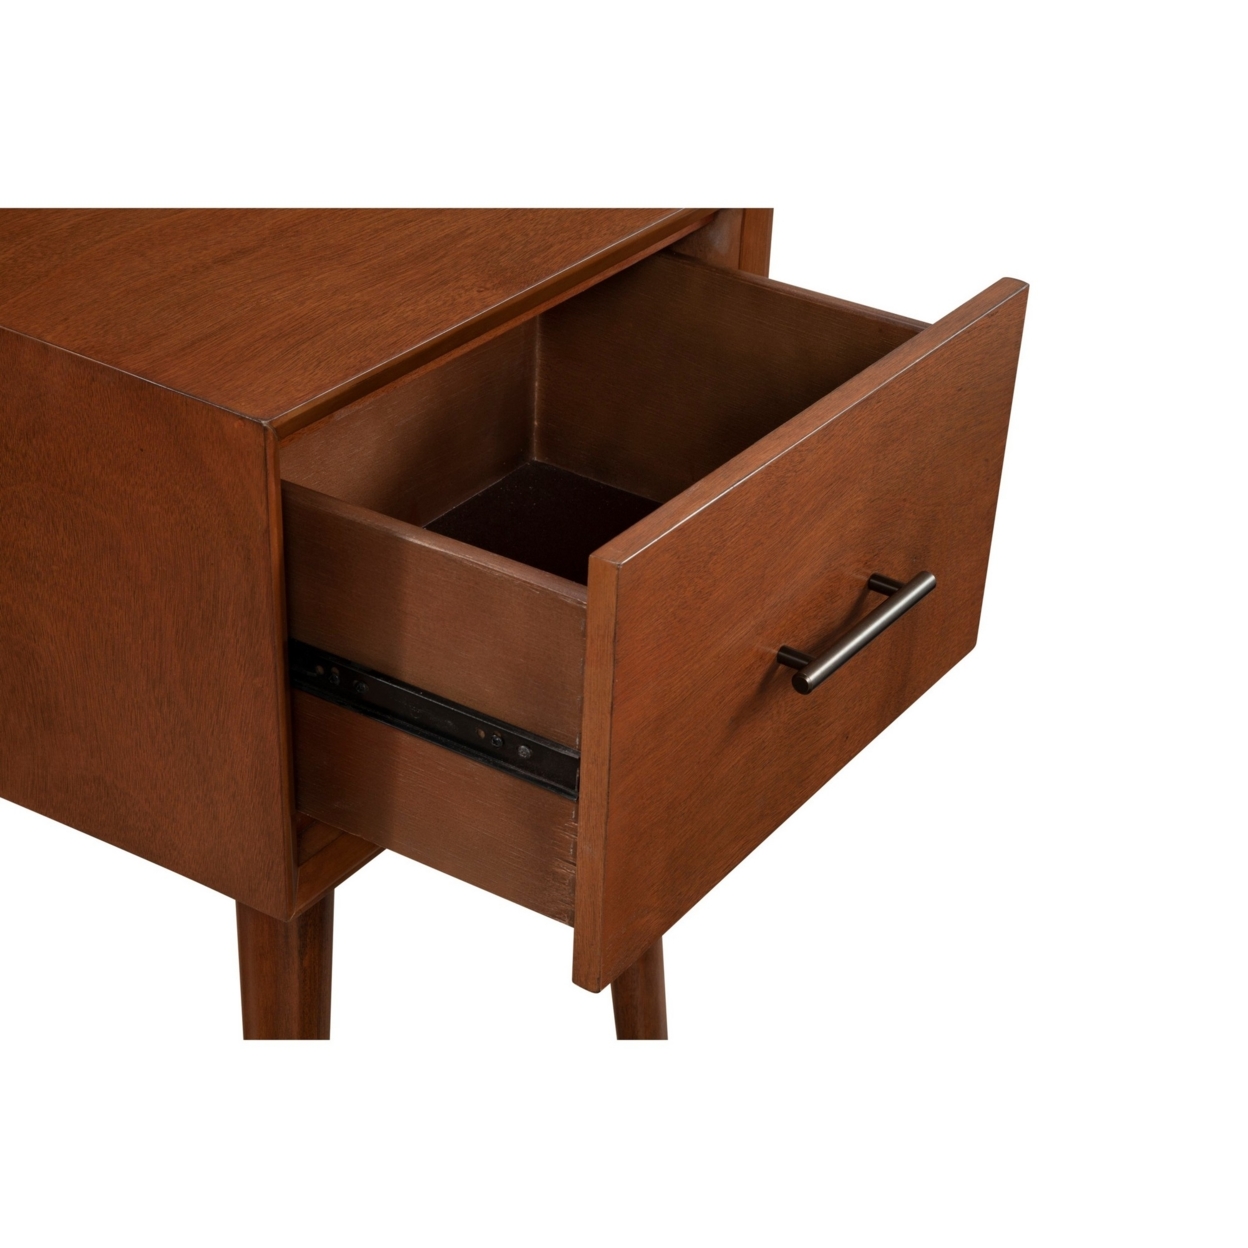 End Table With 1 Drawer And Angled Legs, Brown- Saltoro Sherpi